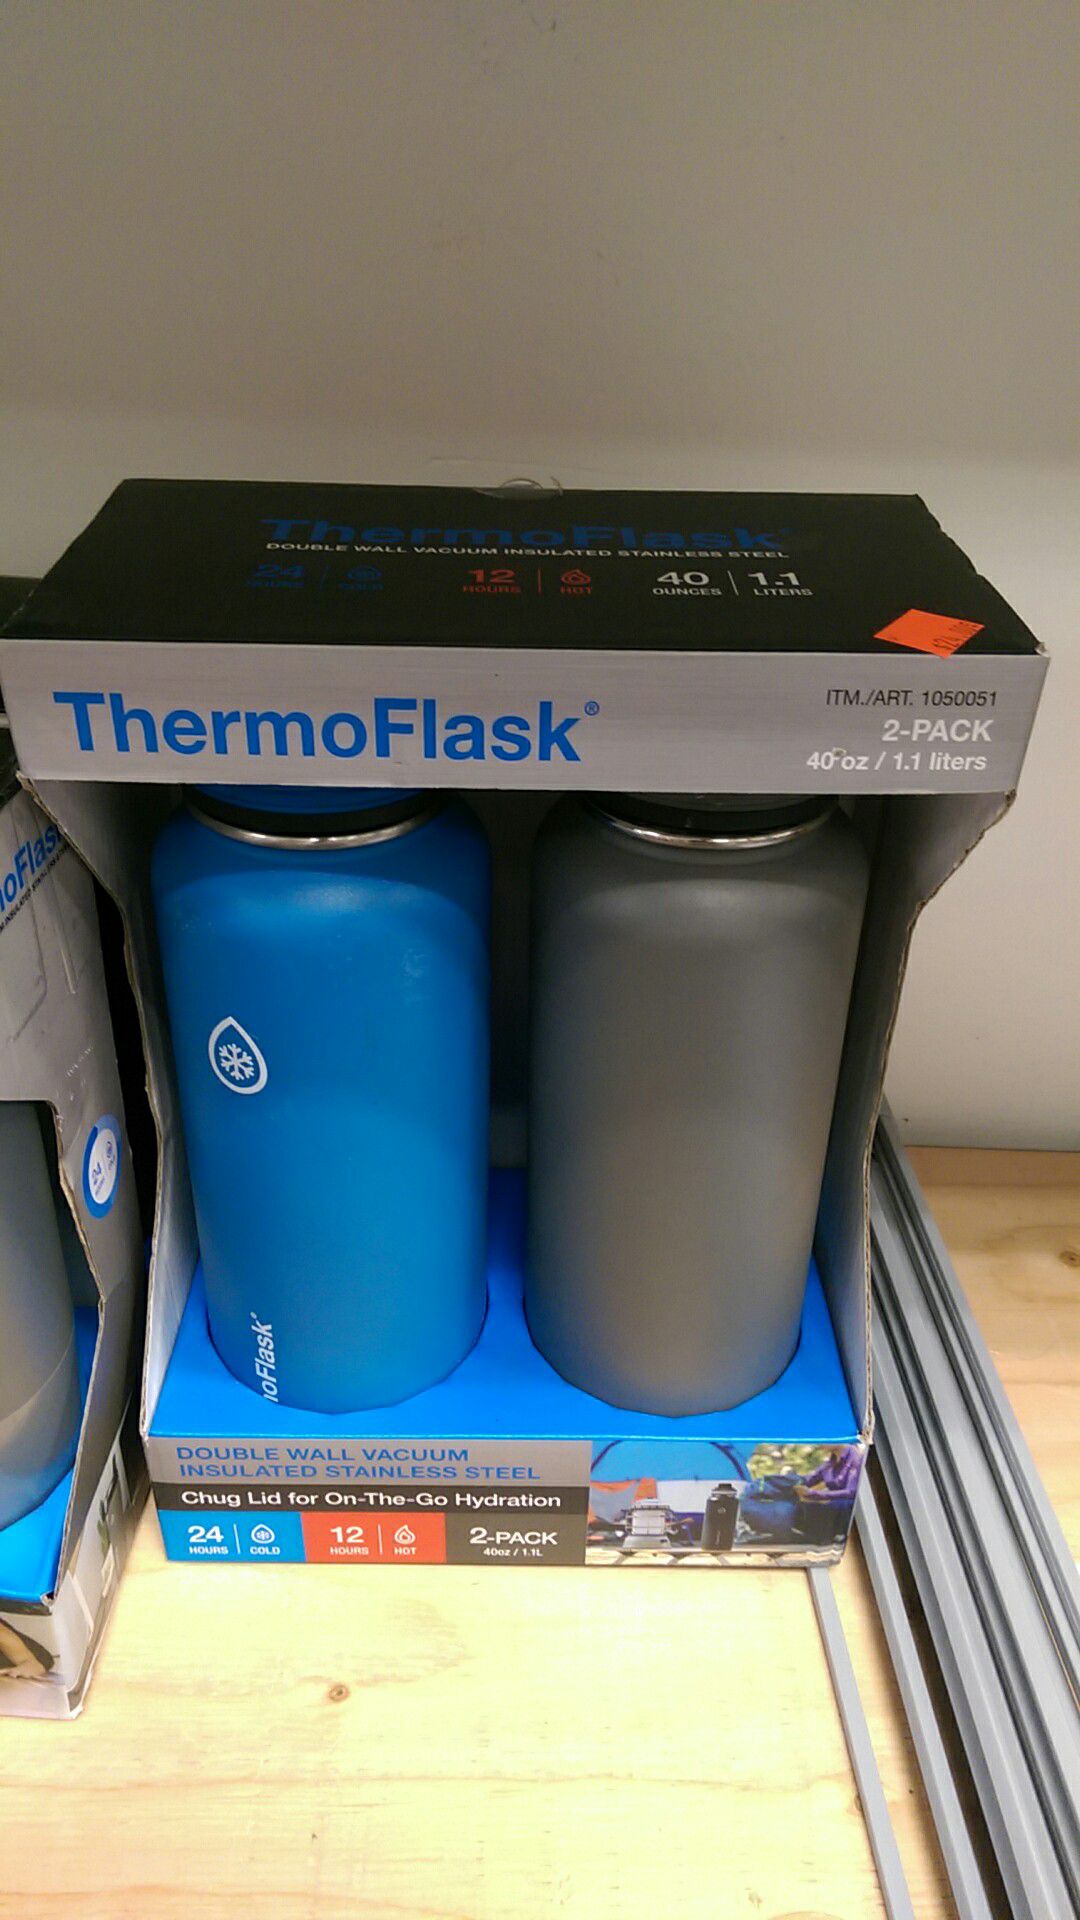 Water flask